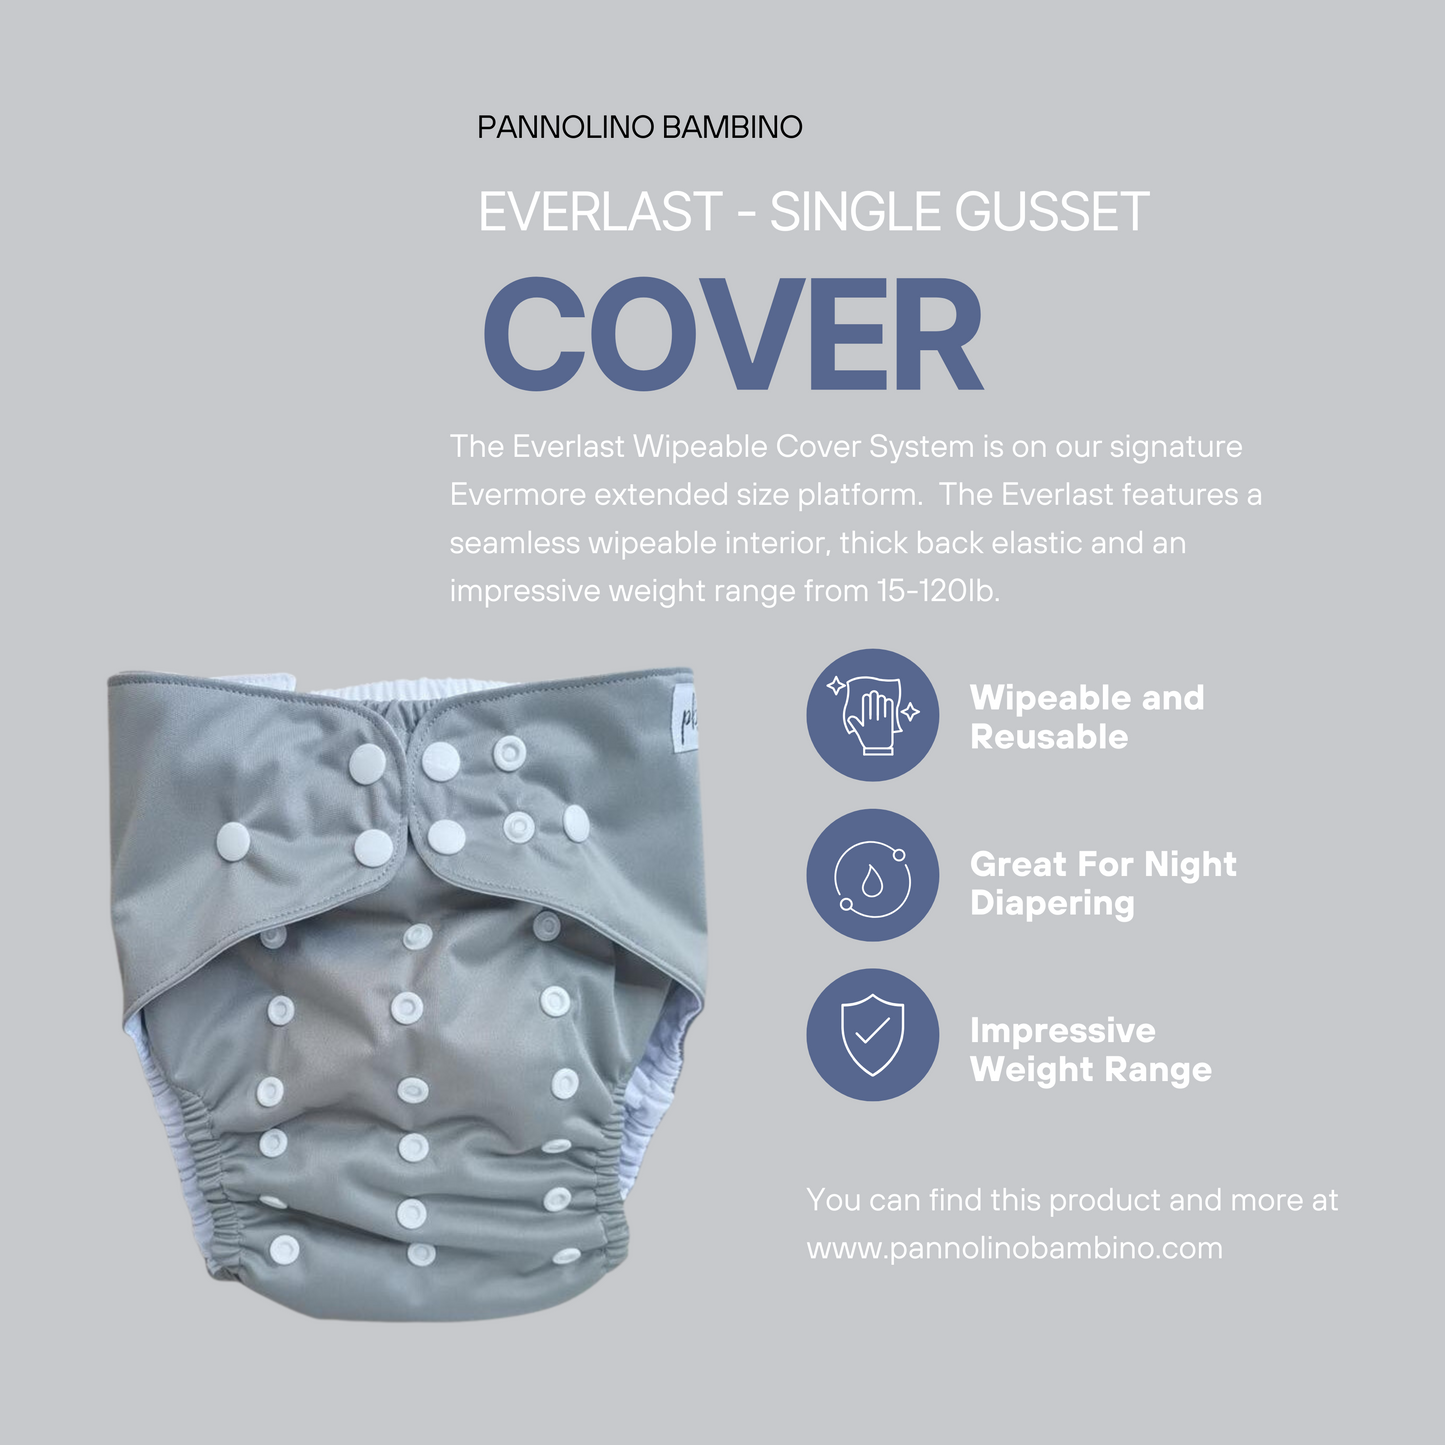 Everlast Wipeable Cover System - Forrest